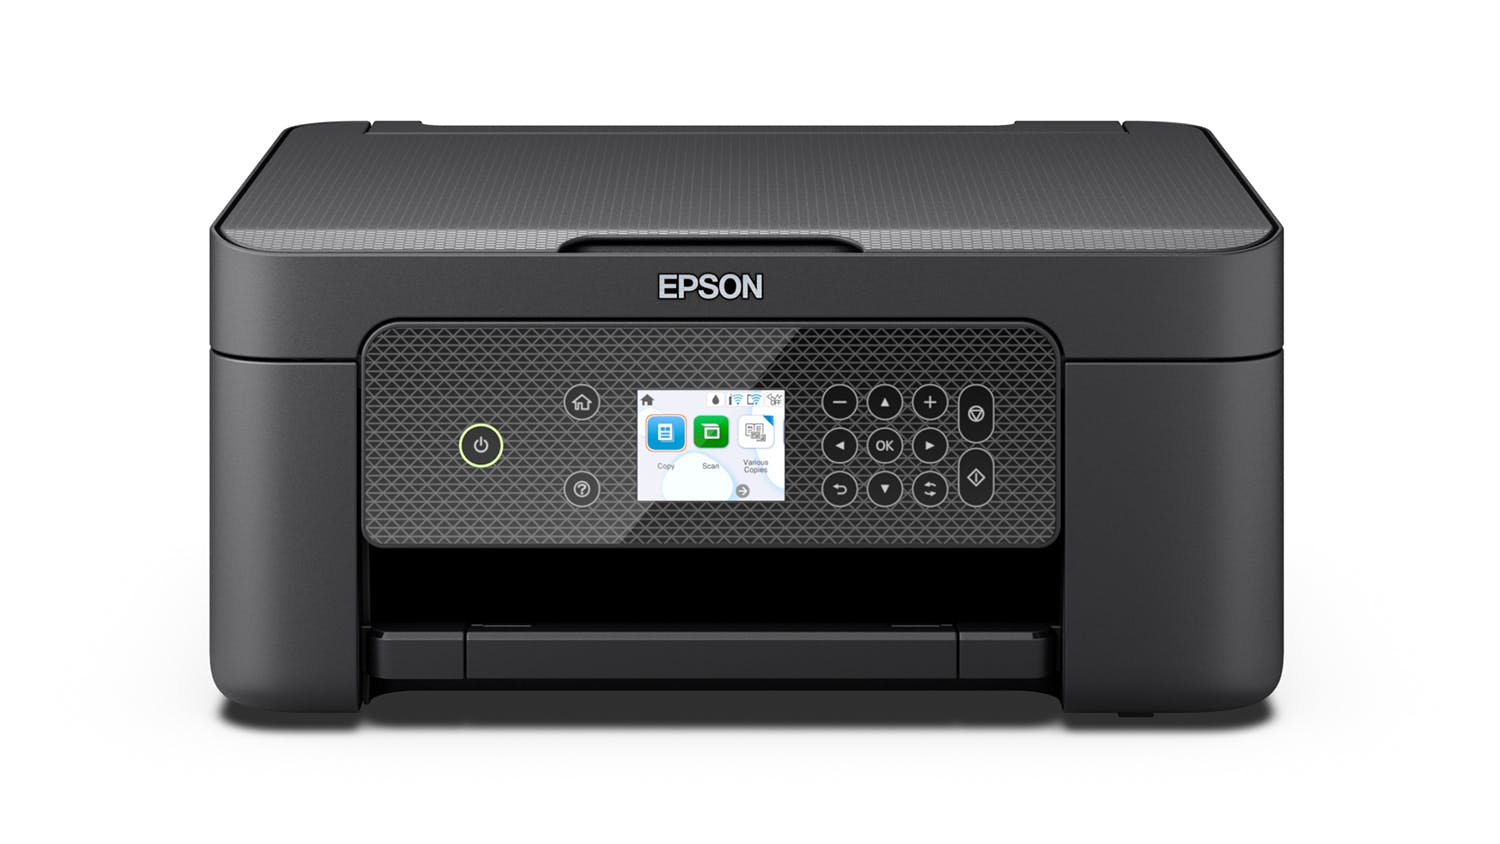 Epson Expression Home XP-4100 vs Epson Expression Home XP-4200